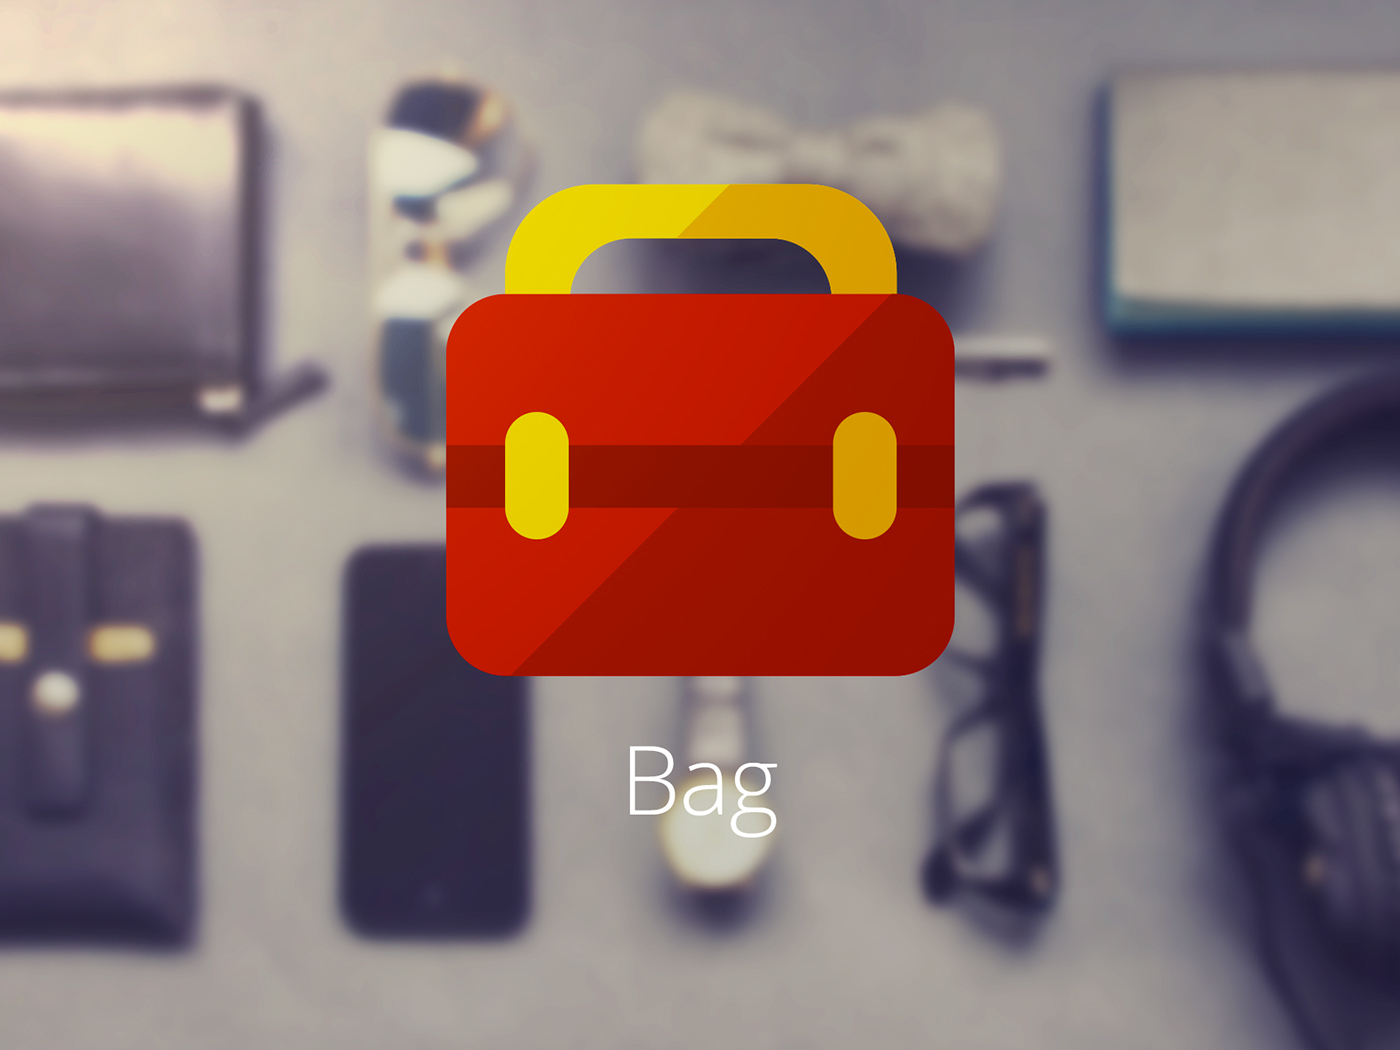 icons deisgn Born mailbox clock rocket pencil flat flat icons simple simple icons trend red yellow blue